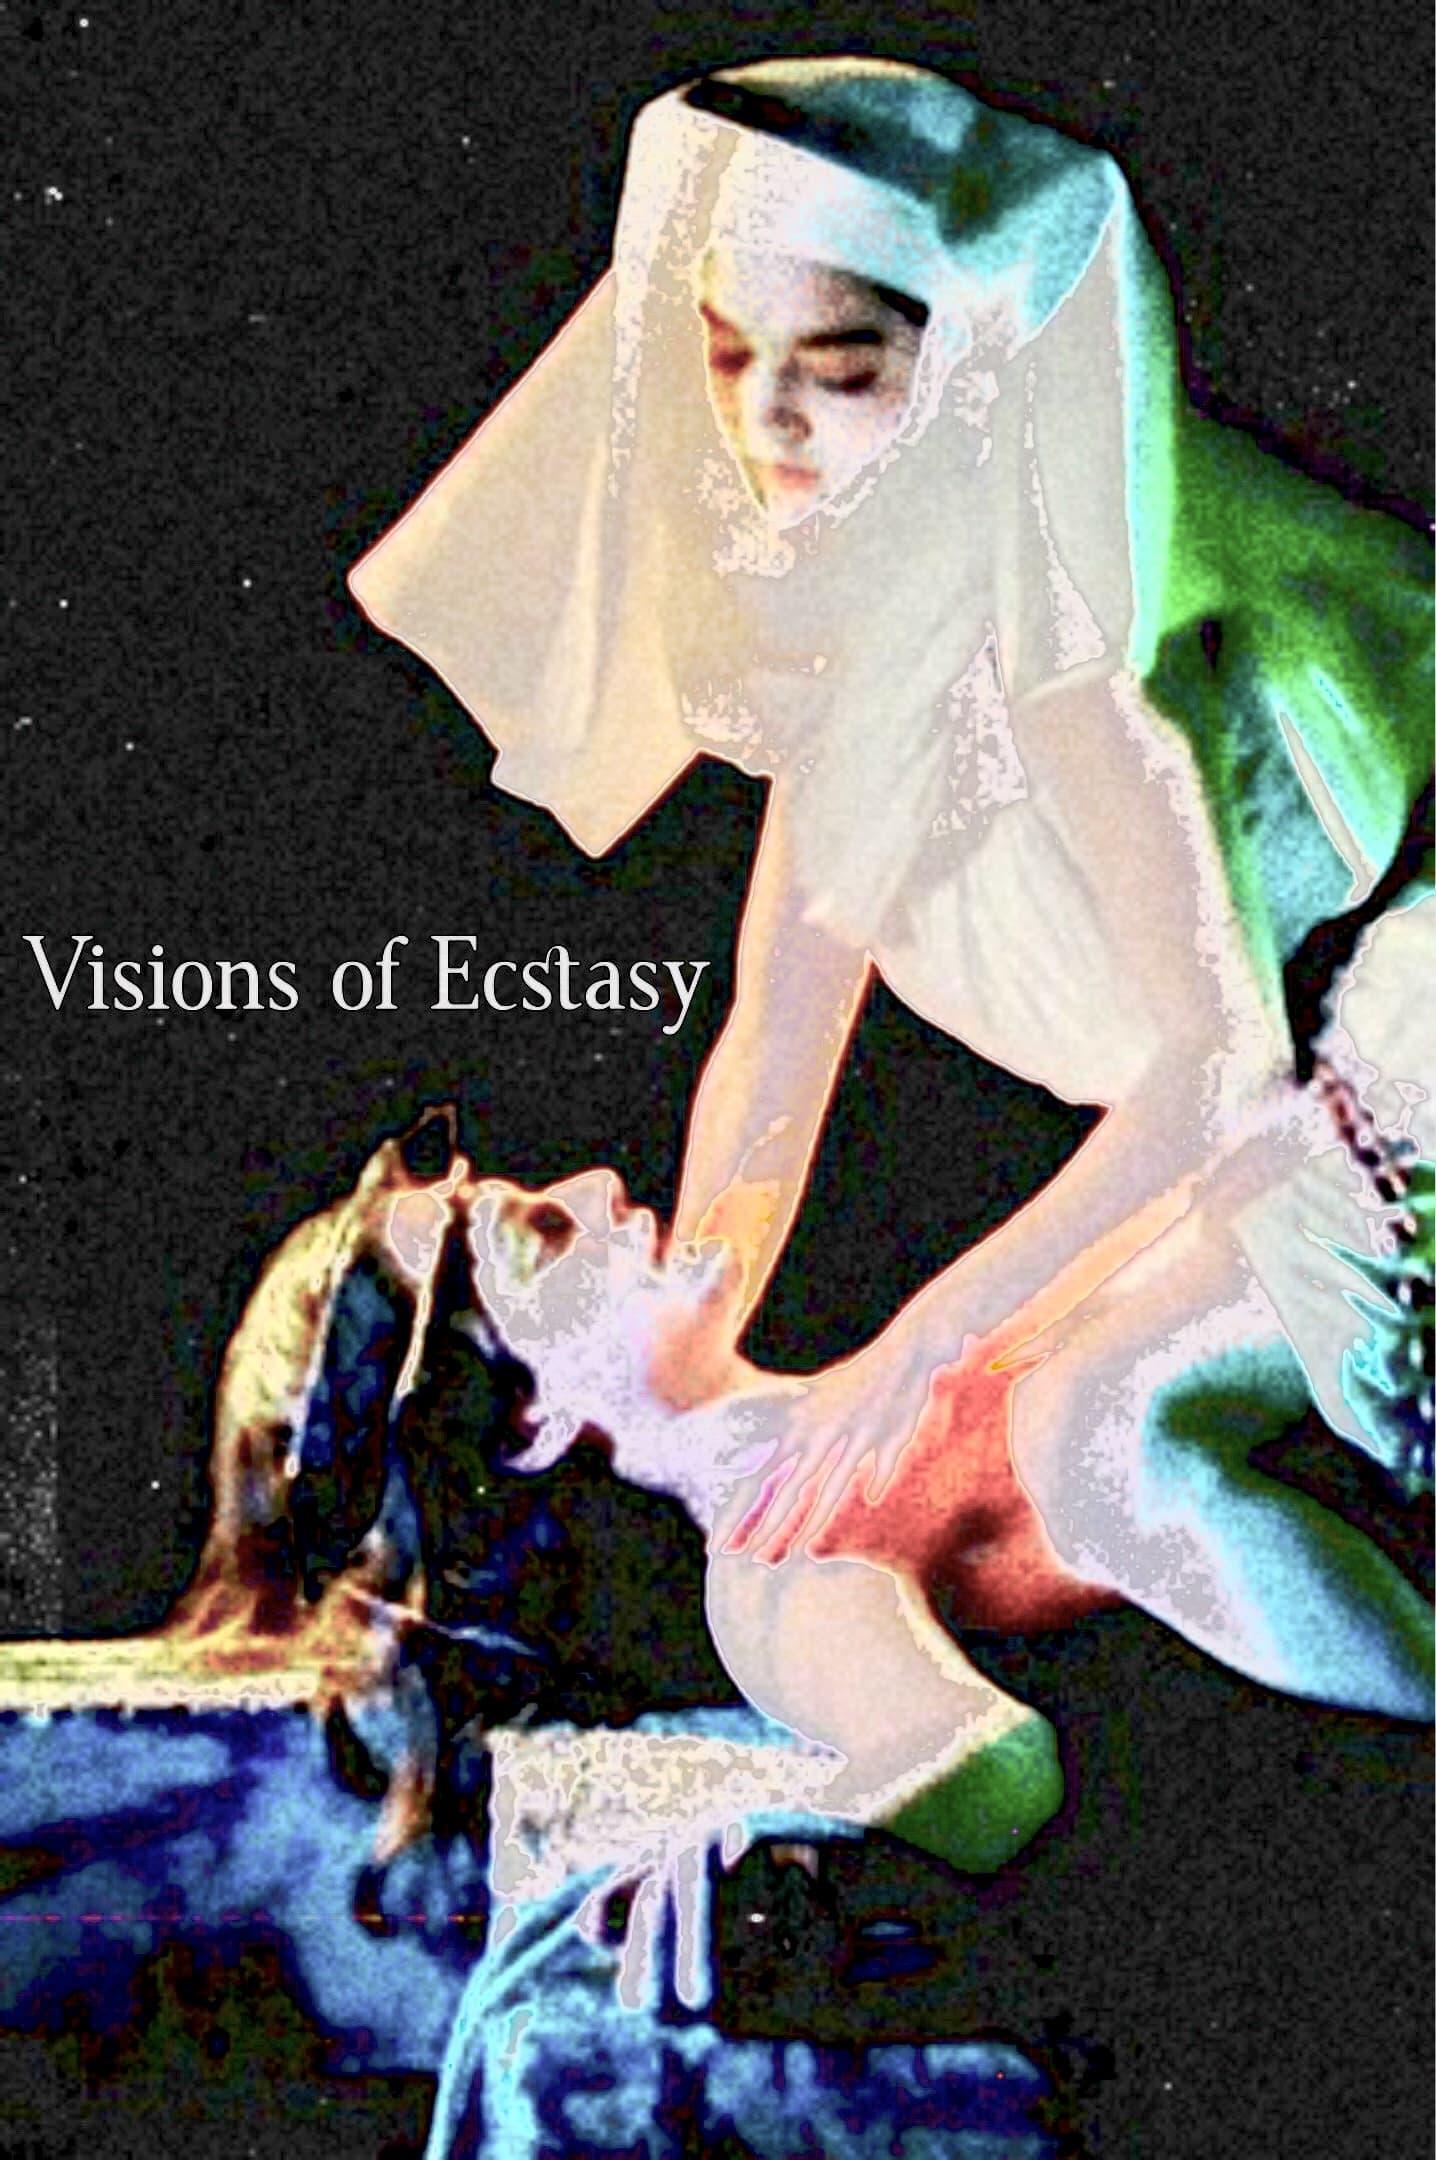 Visions of Ecstasy poster